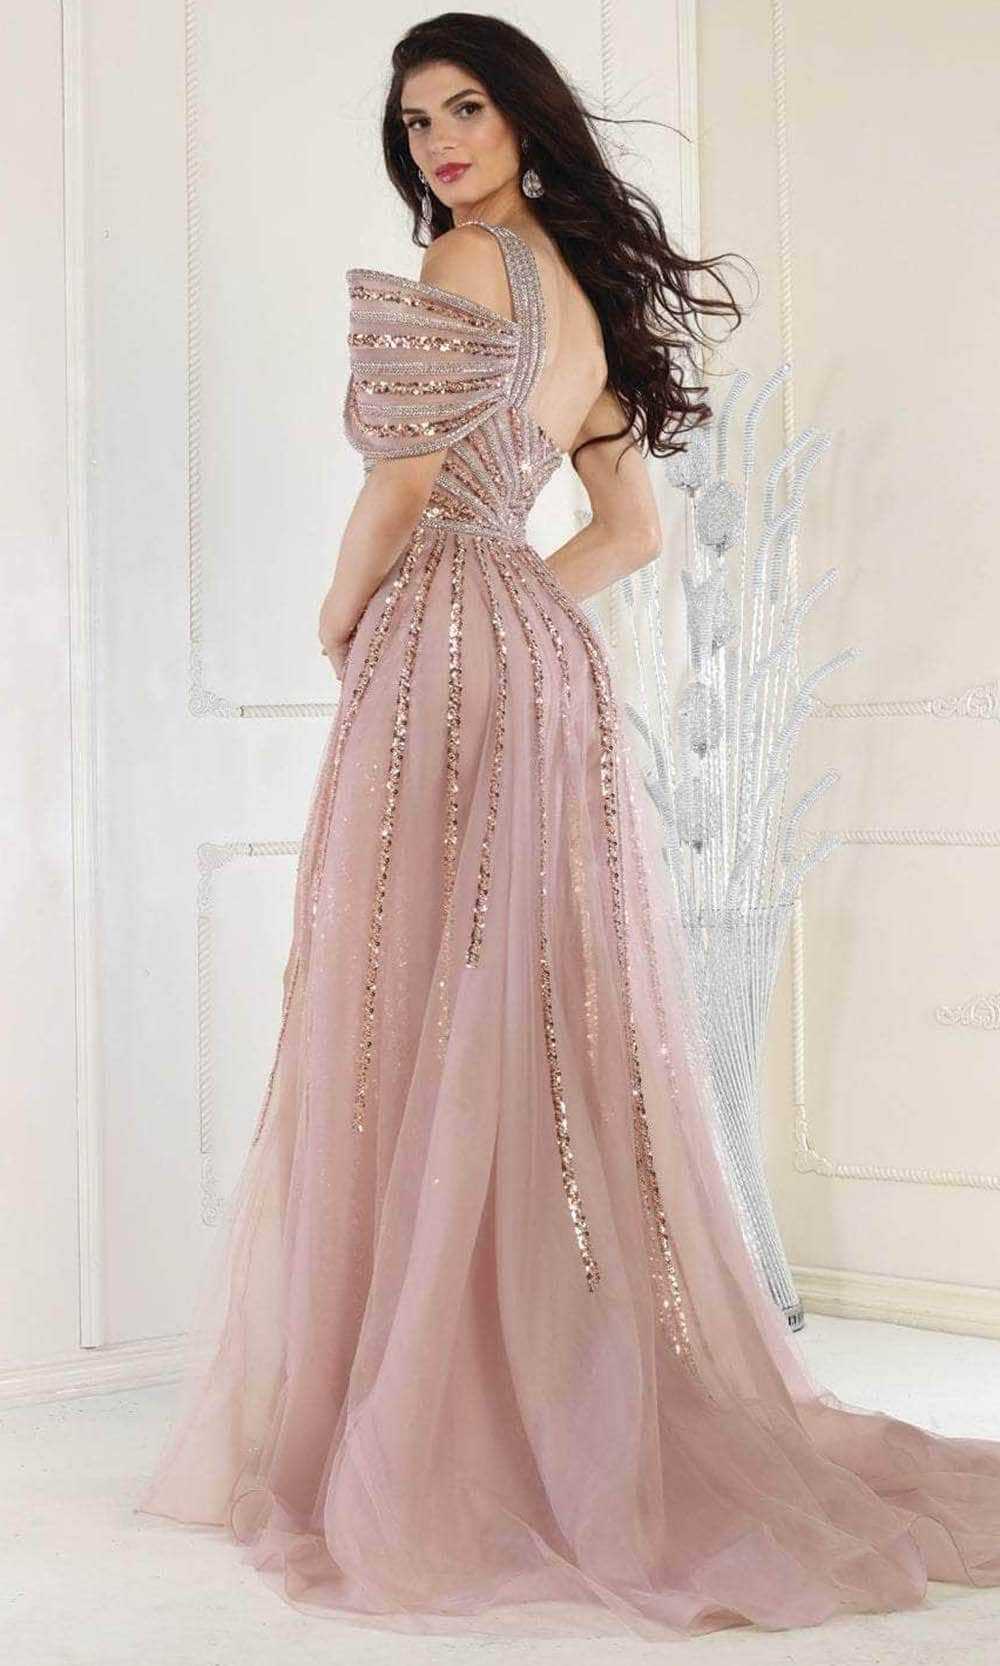 May Queen, May Queen RQ8022 - One Shoulder Overskirt Prom Gown